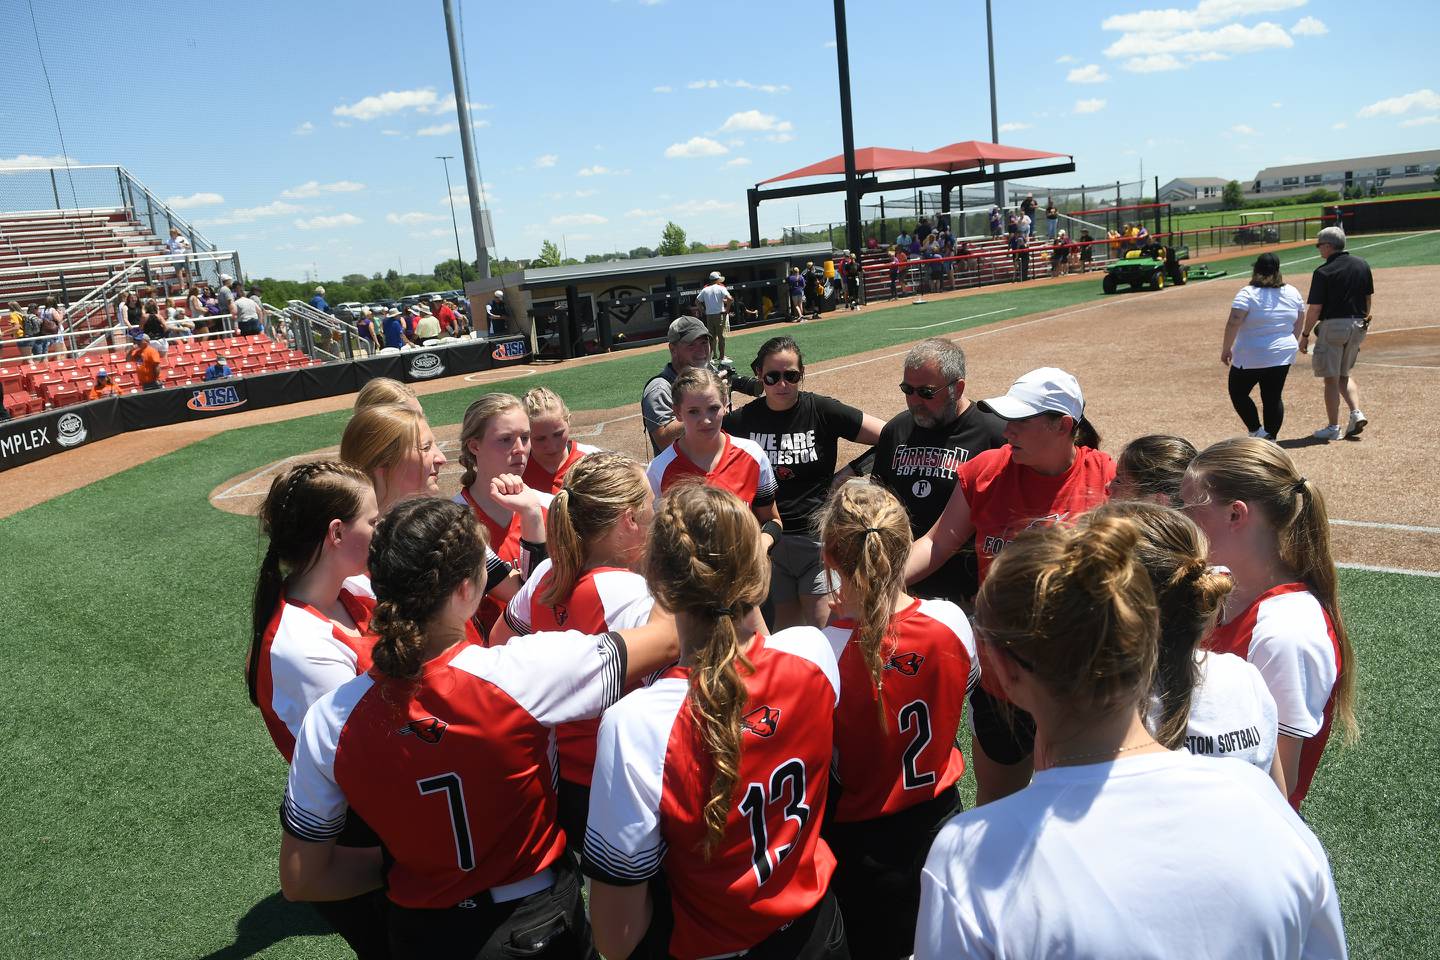 Forreston coach Kim Snider and assistant coaches Erin Kennelly and Kirk Janicke talk to team members after they fell to Casey-Westfield 4-0 in semifinal action at the 1A softball finals in Peoria on Friday, June 3.